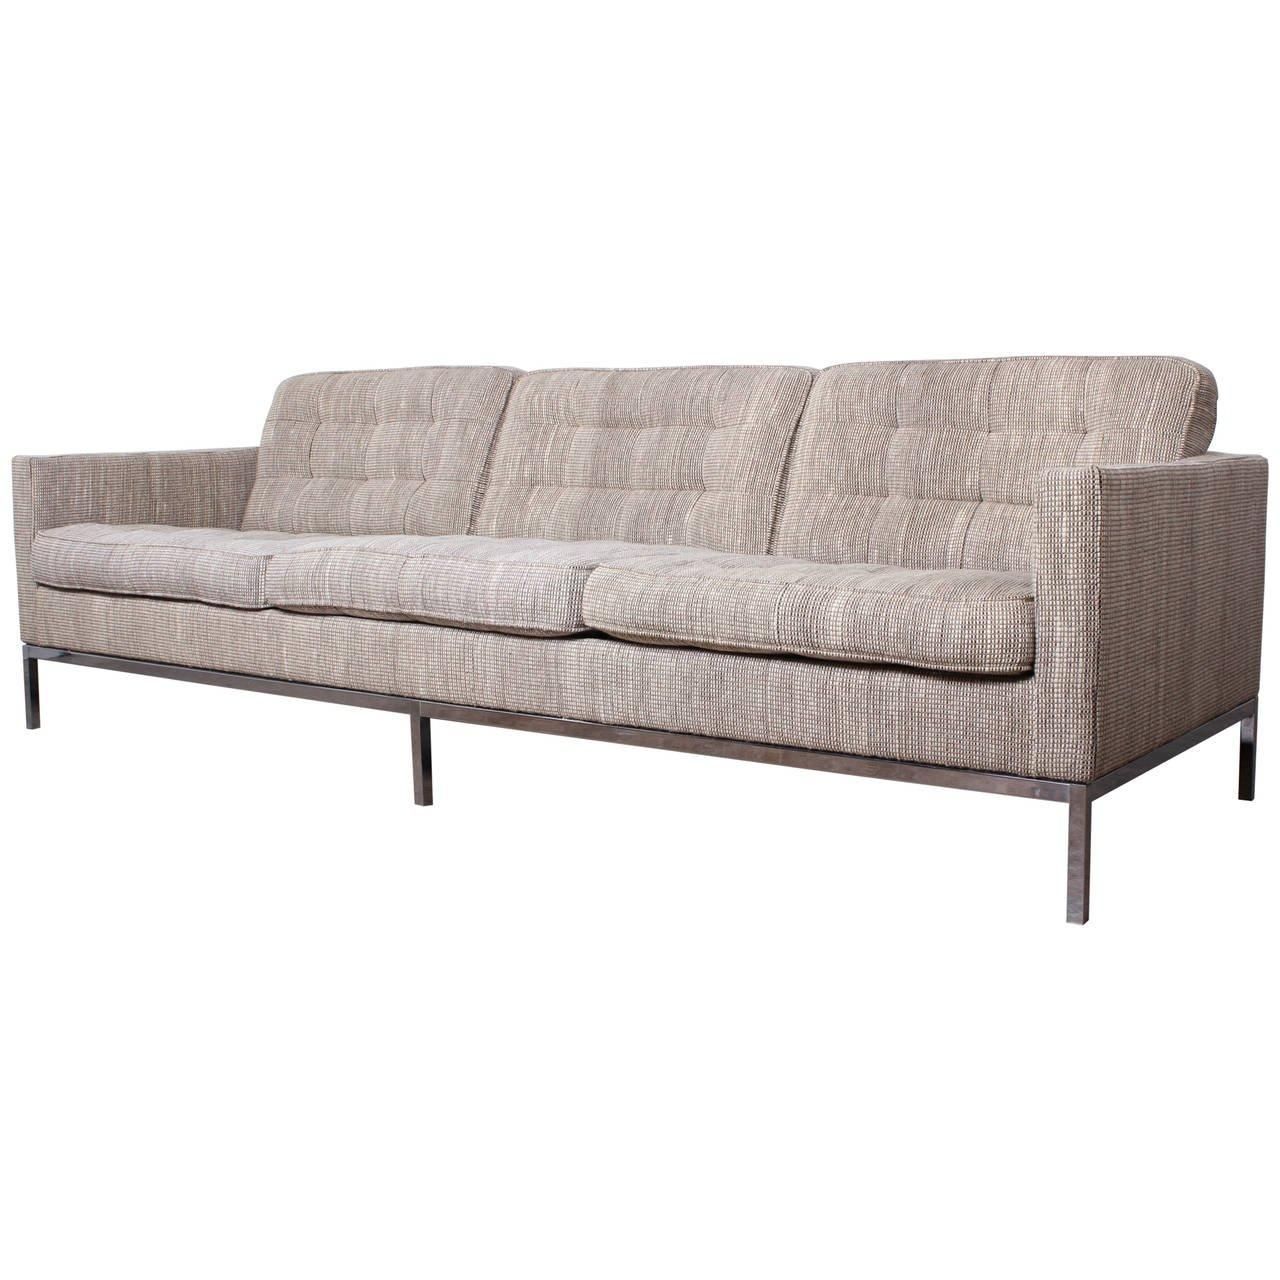 Sofa Designedflorence Knoll In "cato" Wool Upholstery For Sale Within Florence Large Sofas (View 2 of 20)